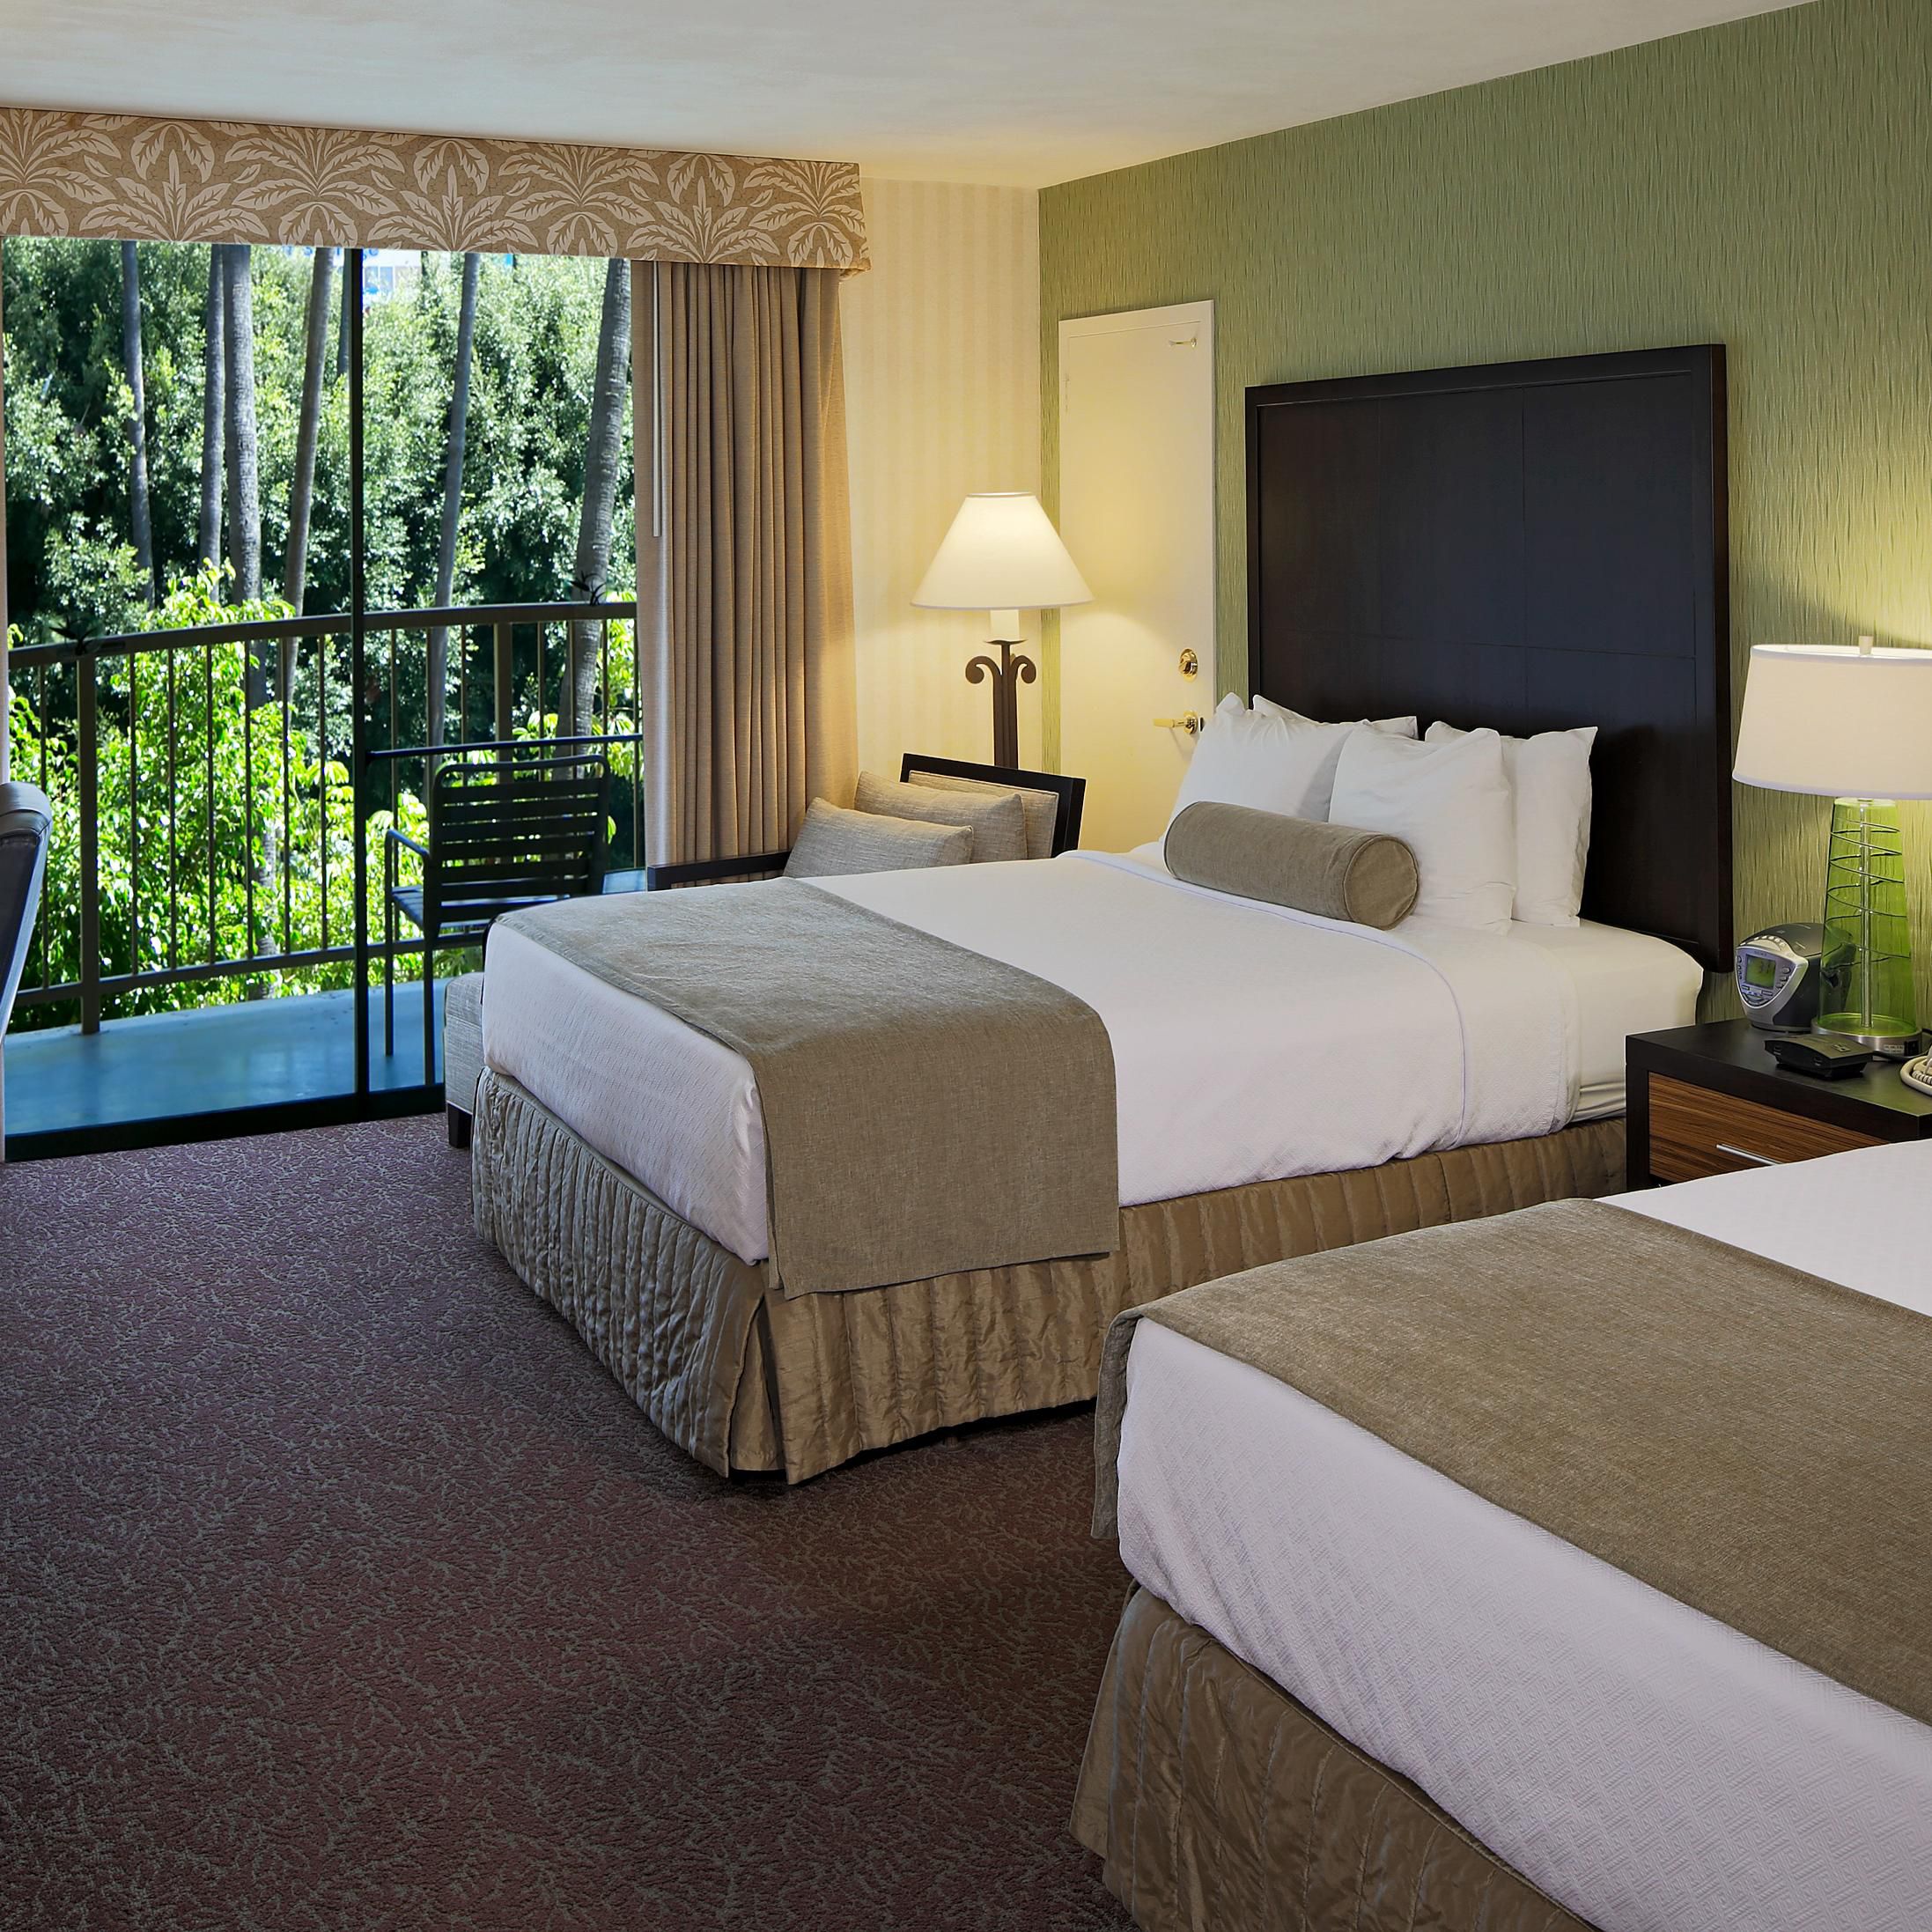 Our two queen bedded rooms are perfect for the family.